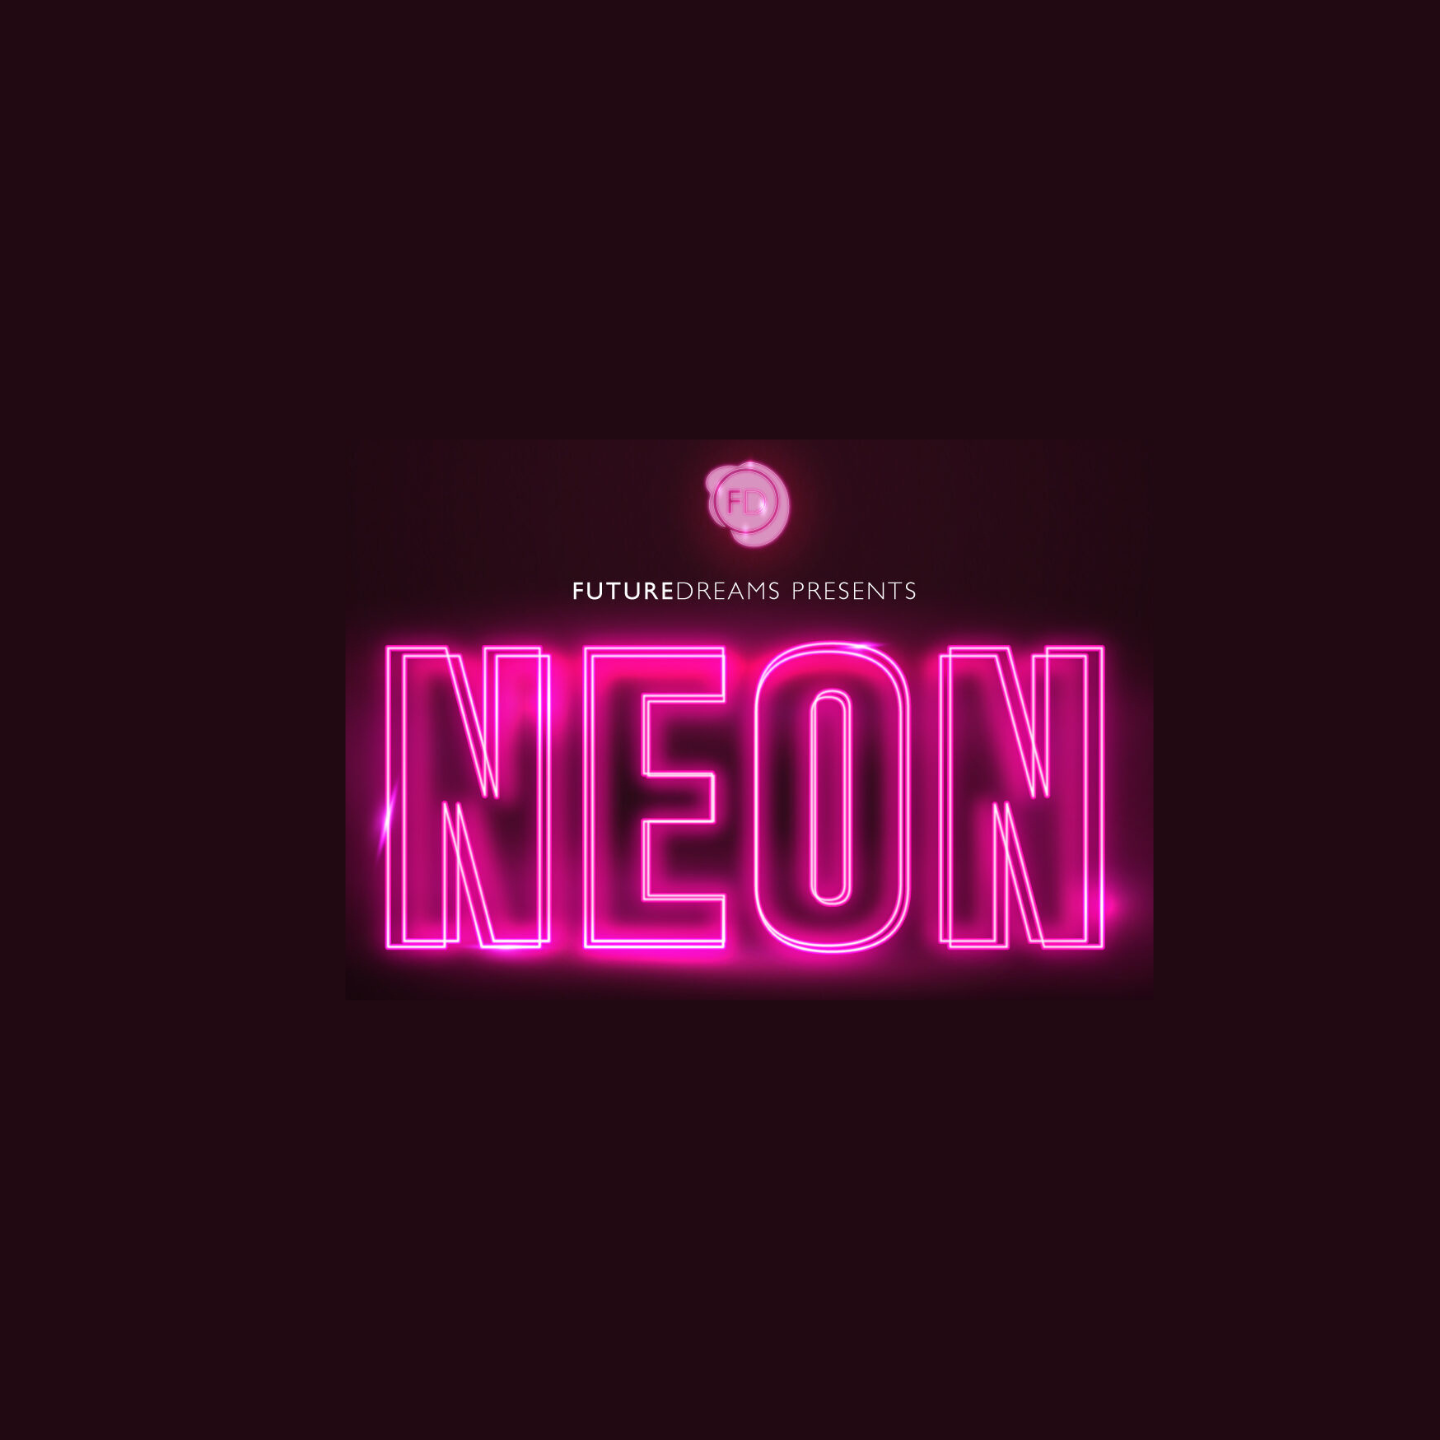 FutureDreams presents NEON on 16 March 2023 at the Roundhouse, London